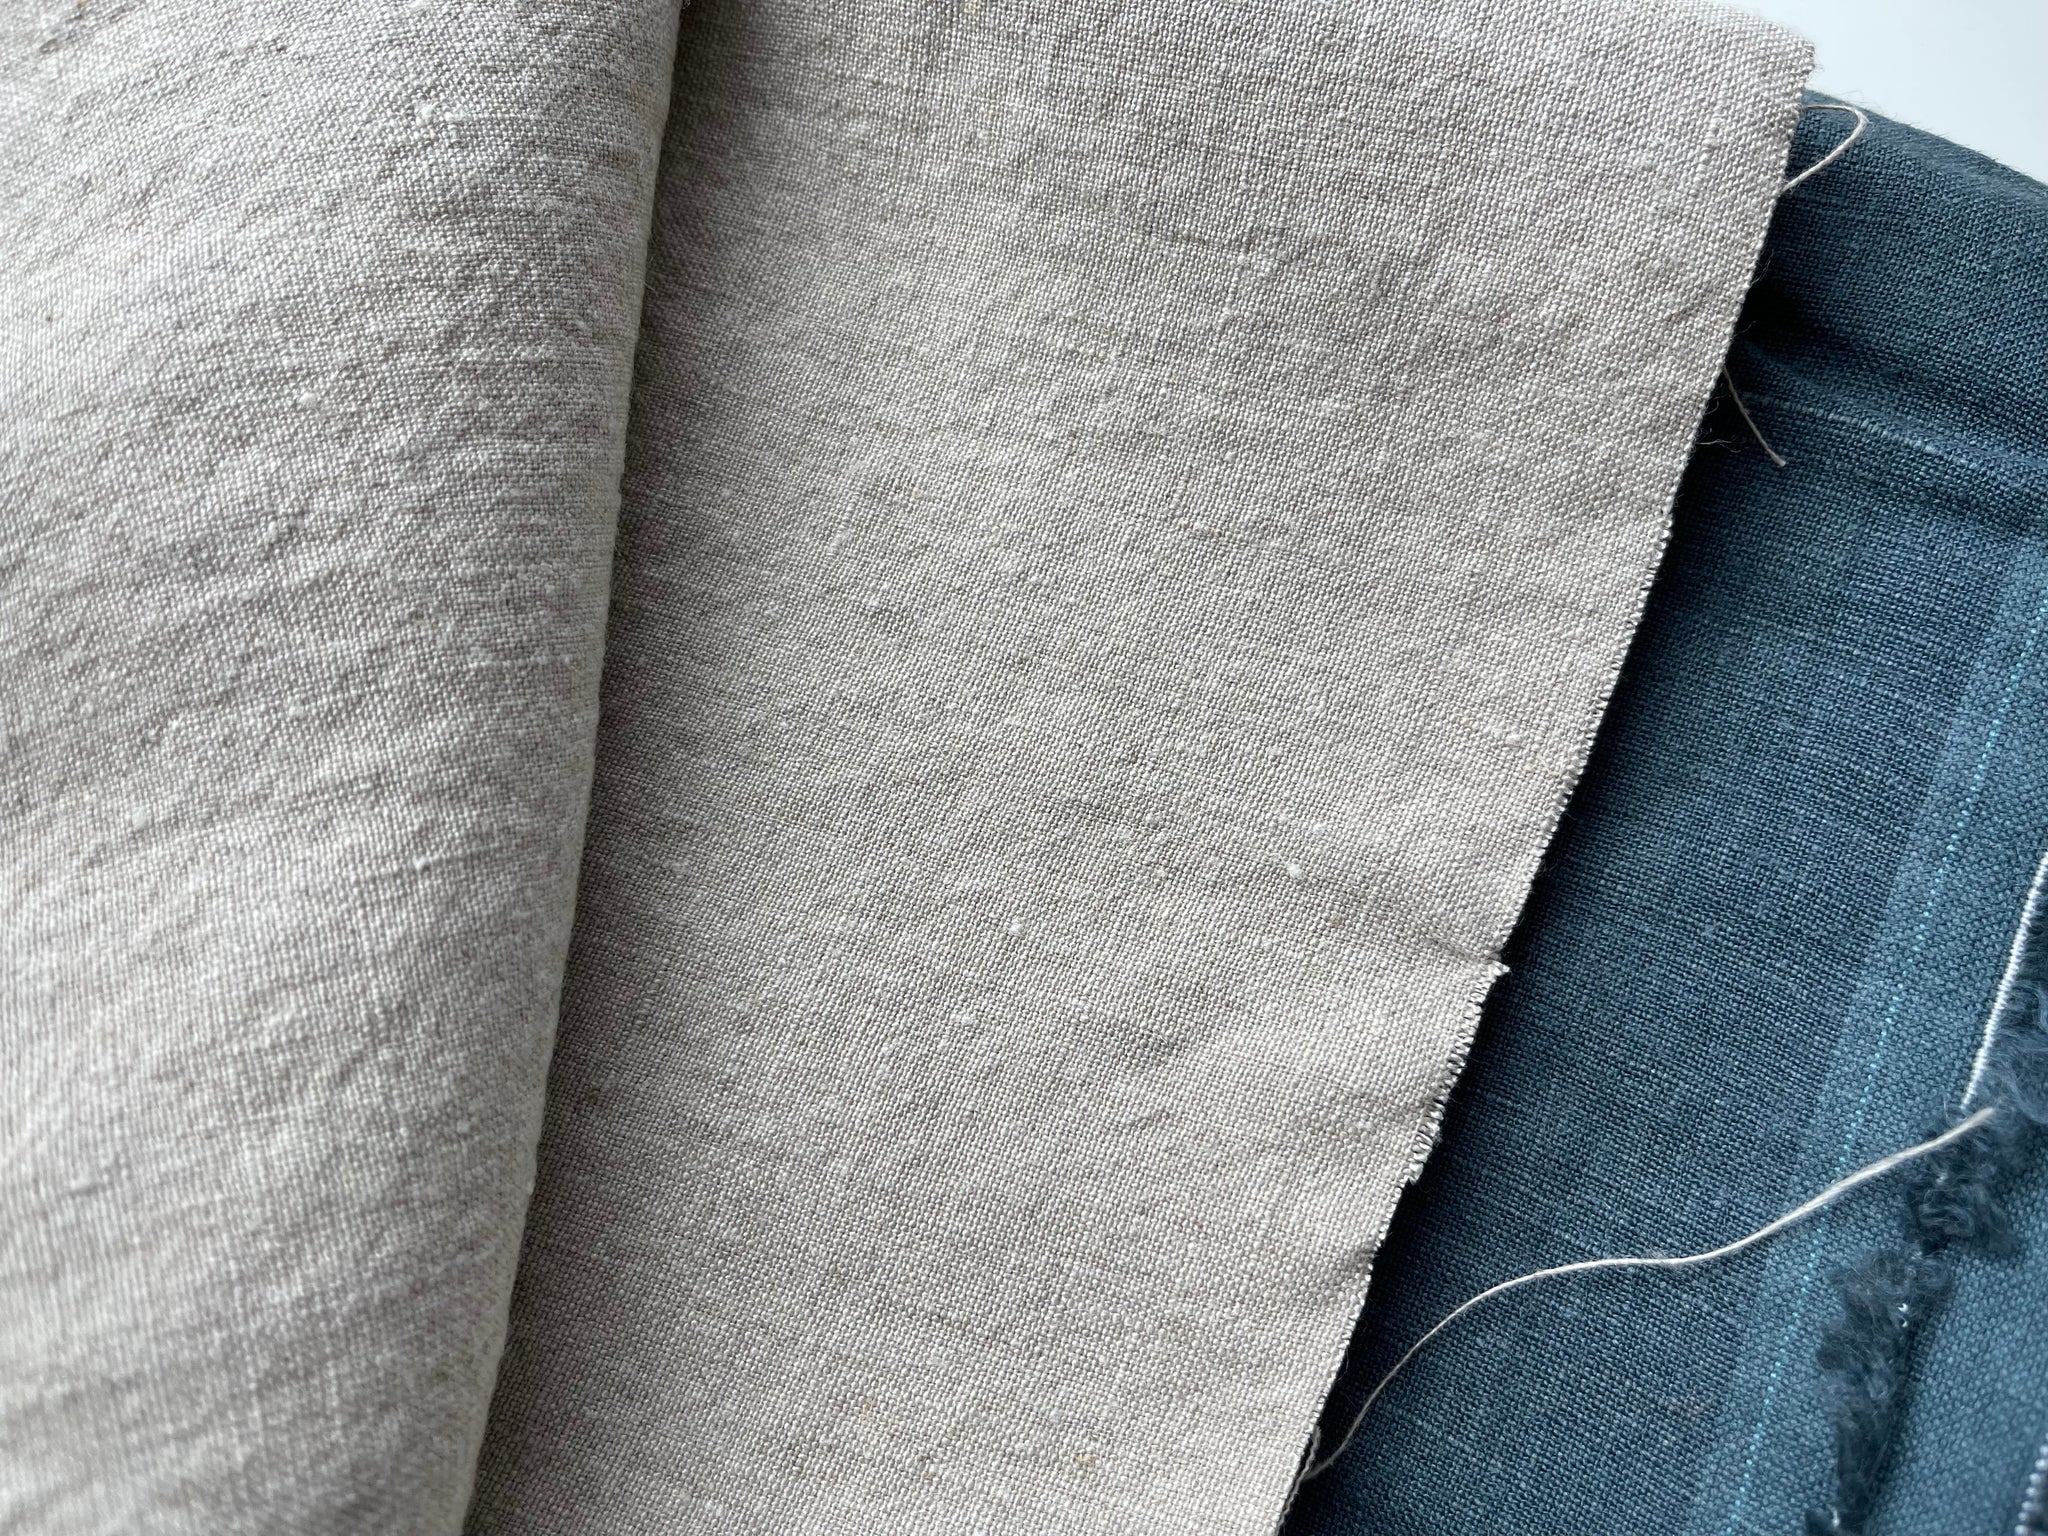 Linen Fabric Remnants - Sea Blue and Natural Stone Washed